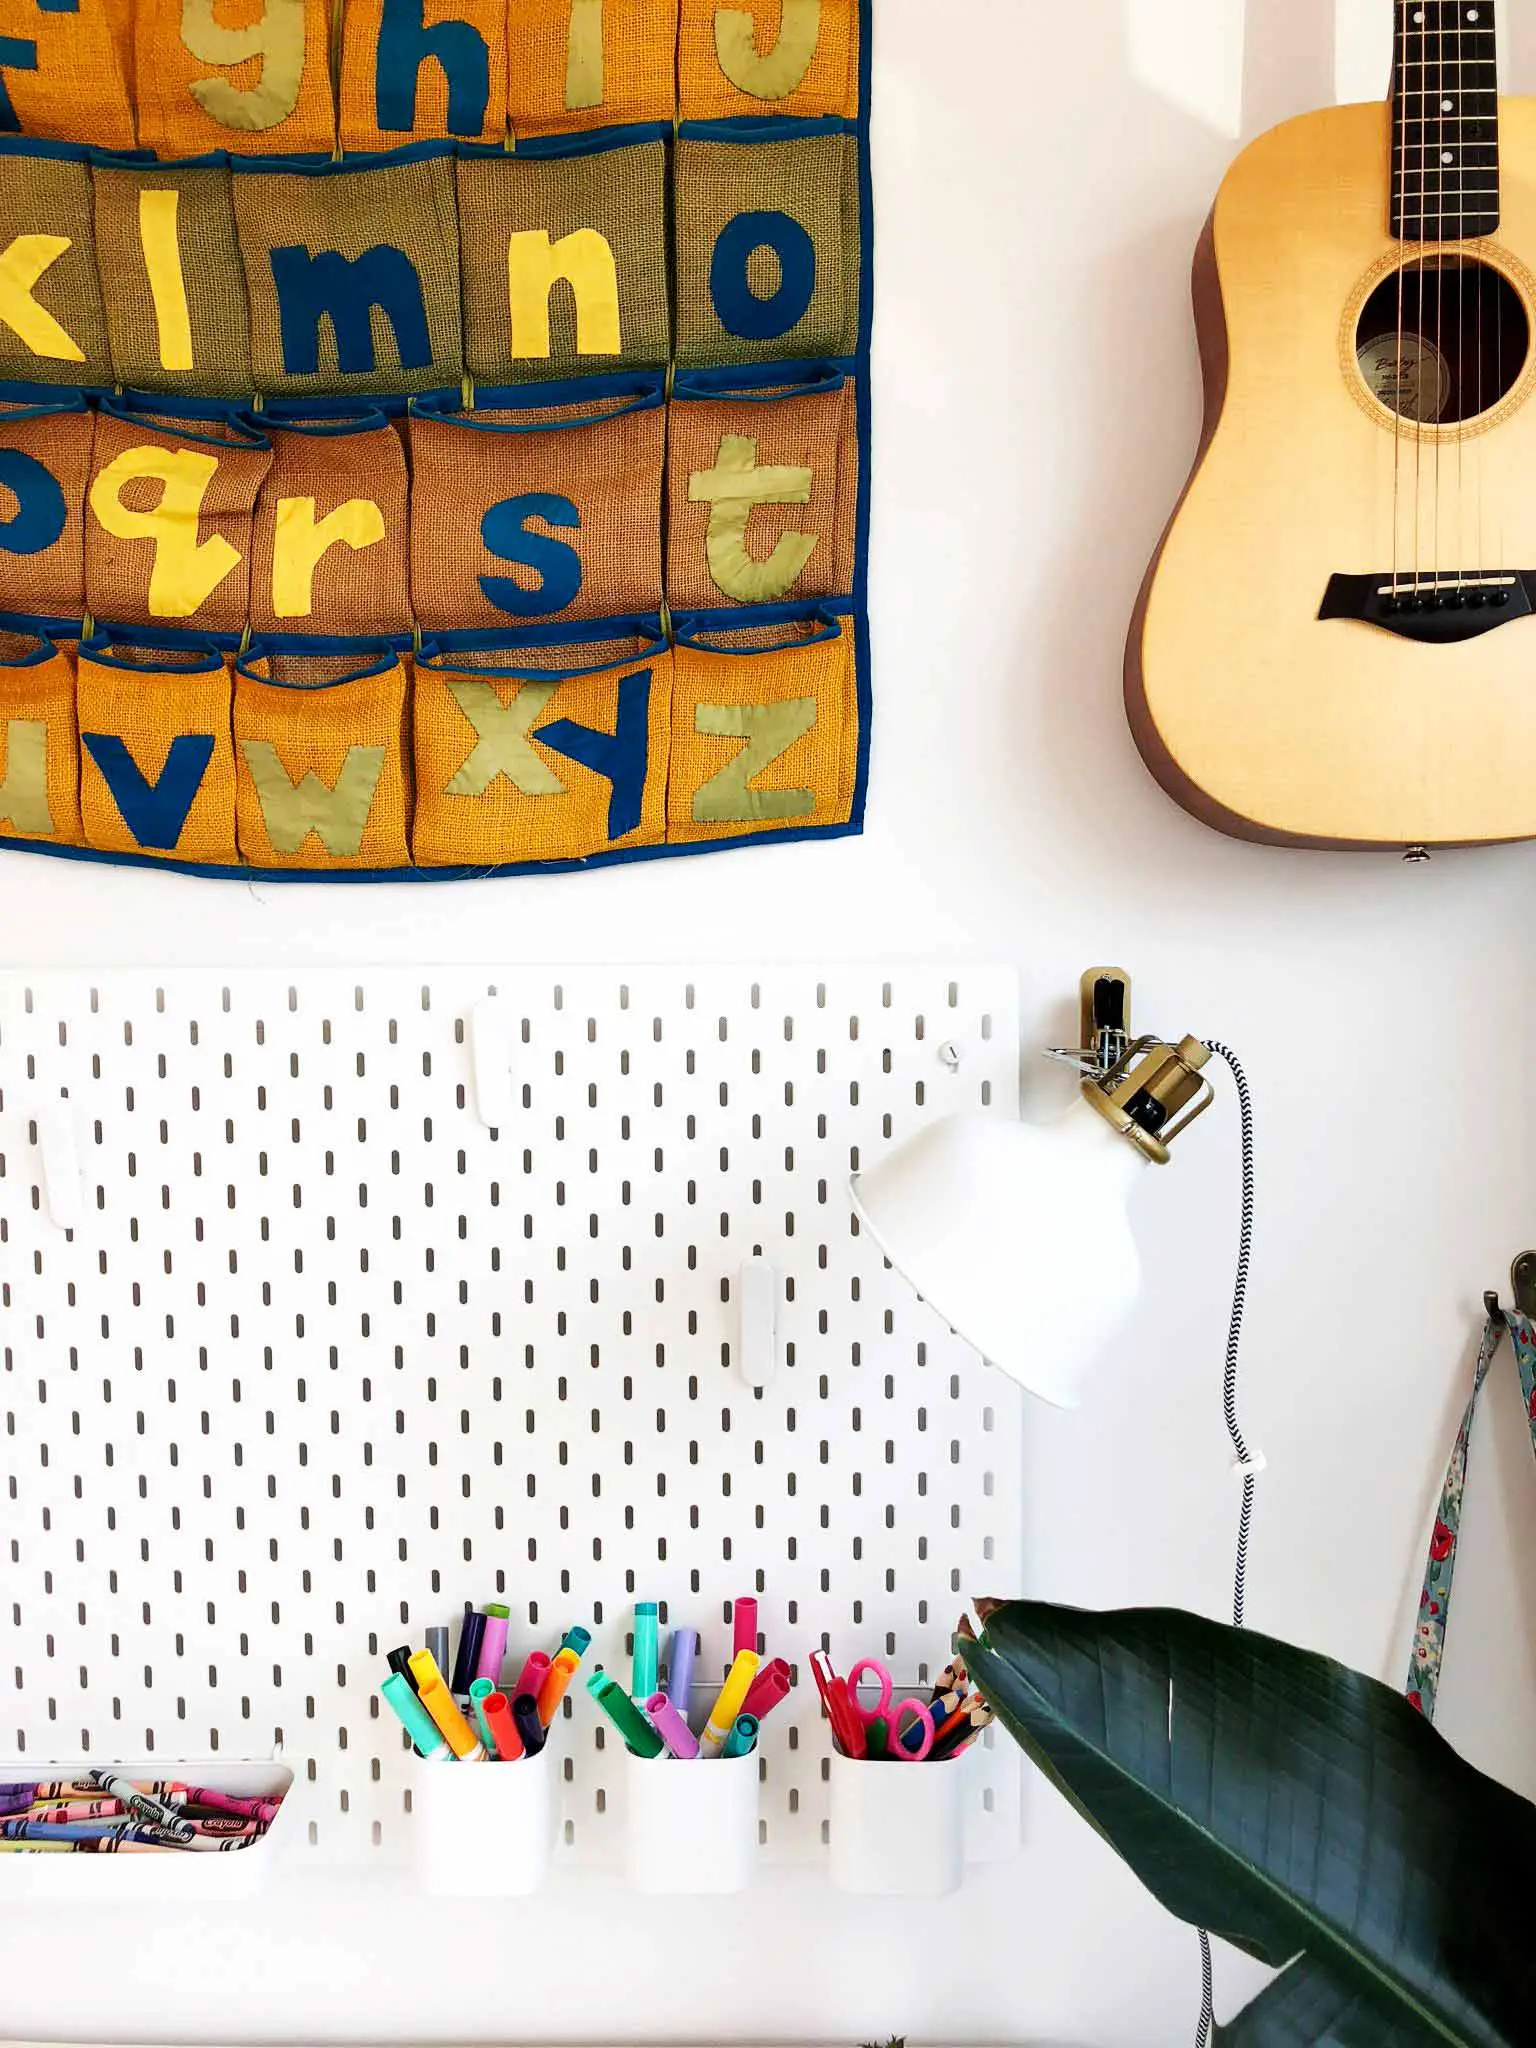 IKEA SKADIS pegboard with pens and crayons, guitar mounted on the wall